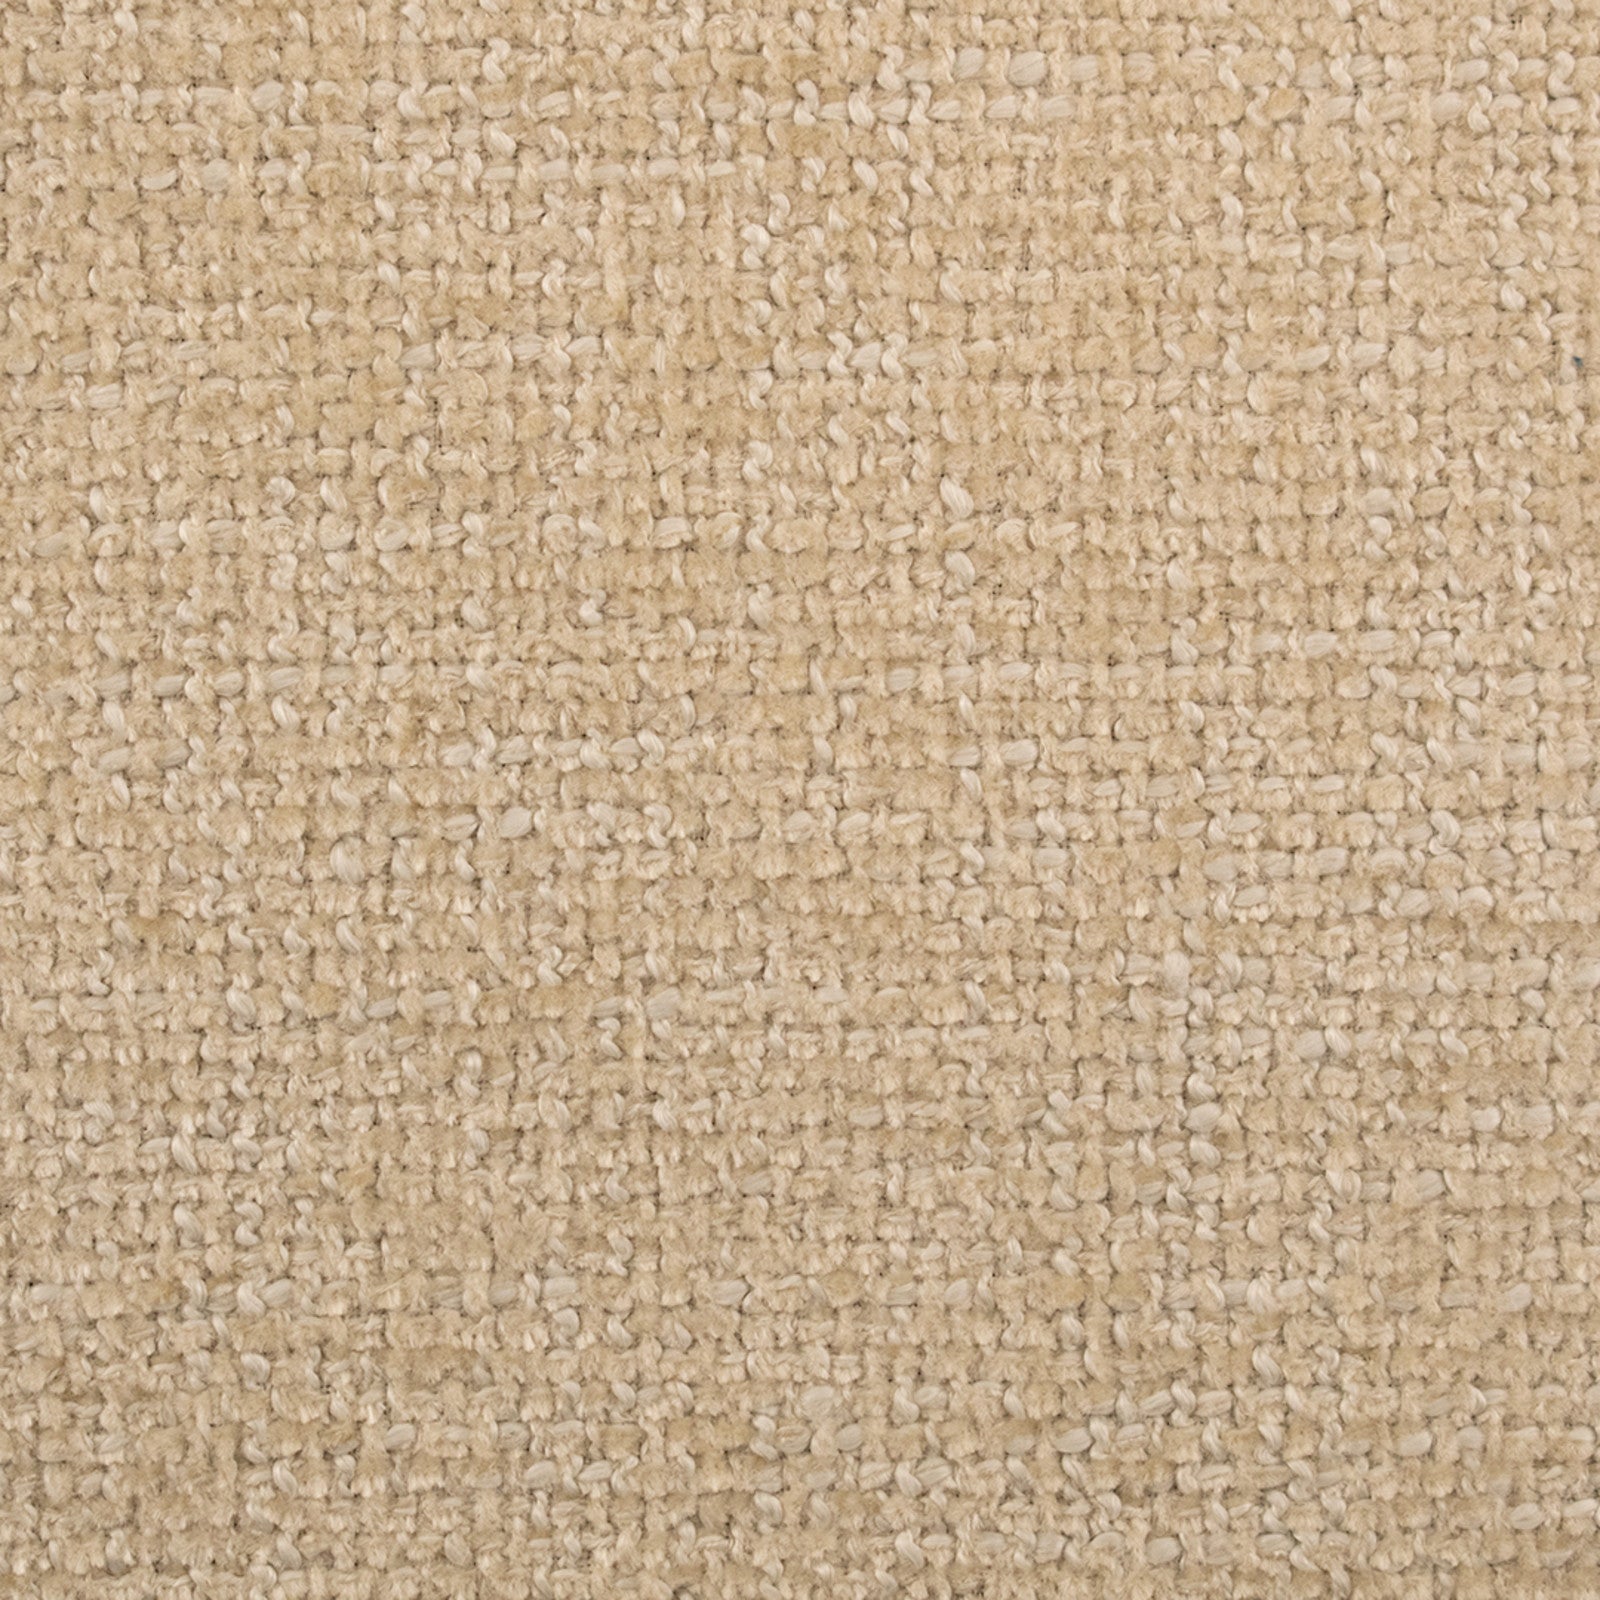 Purchase Greenhouse Fabric S5981 Sand